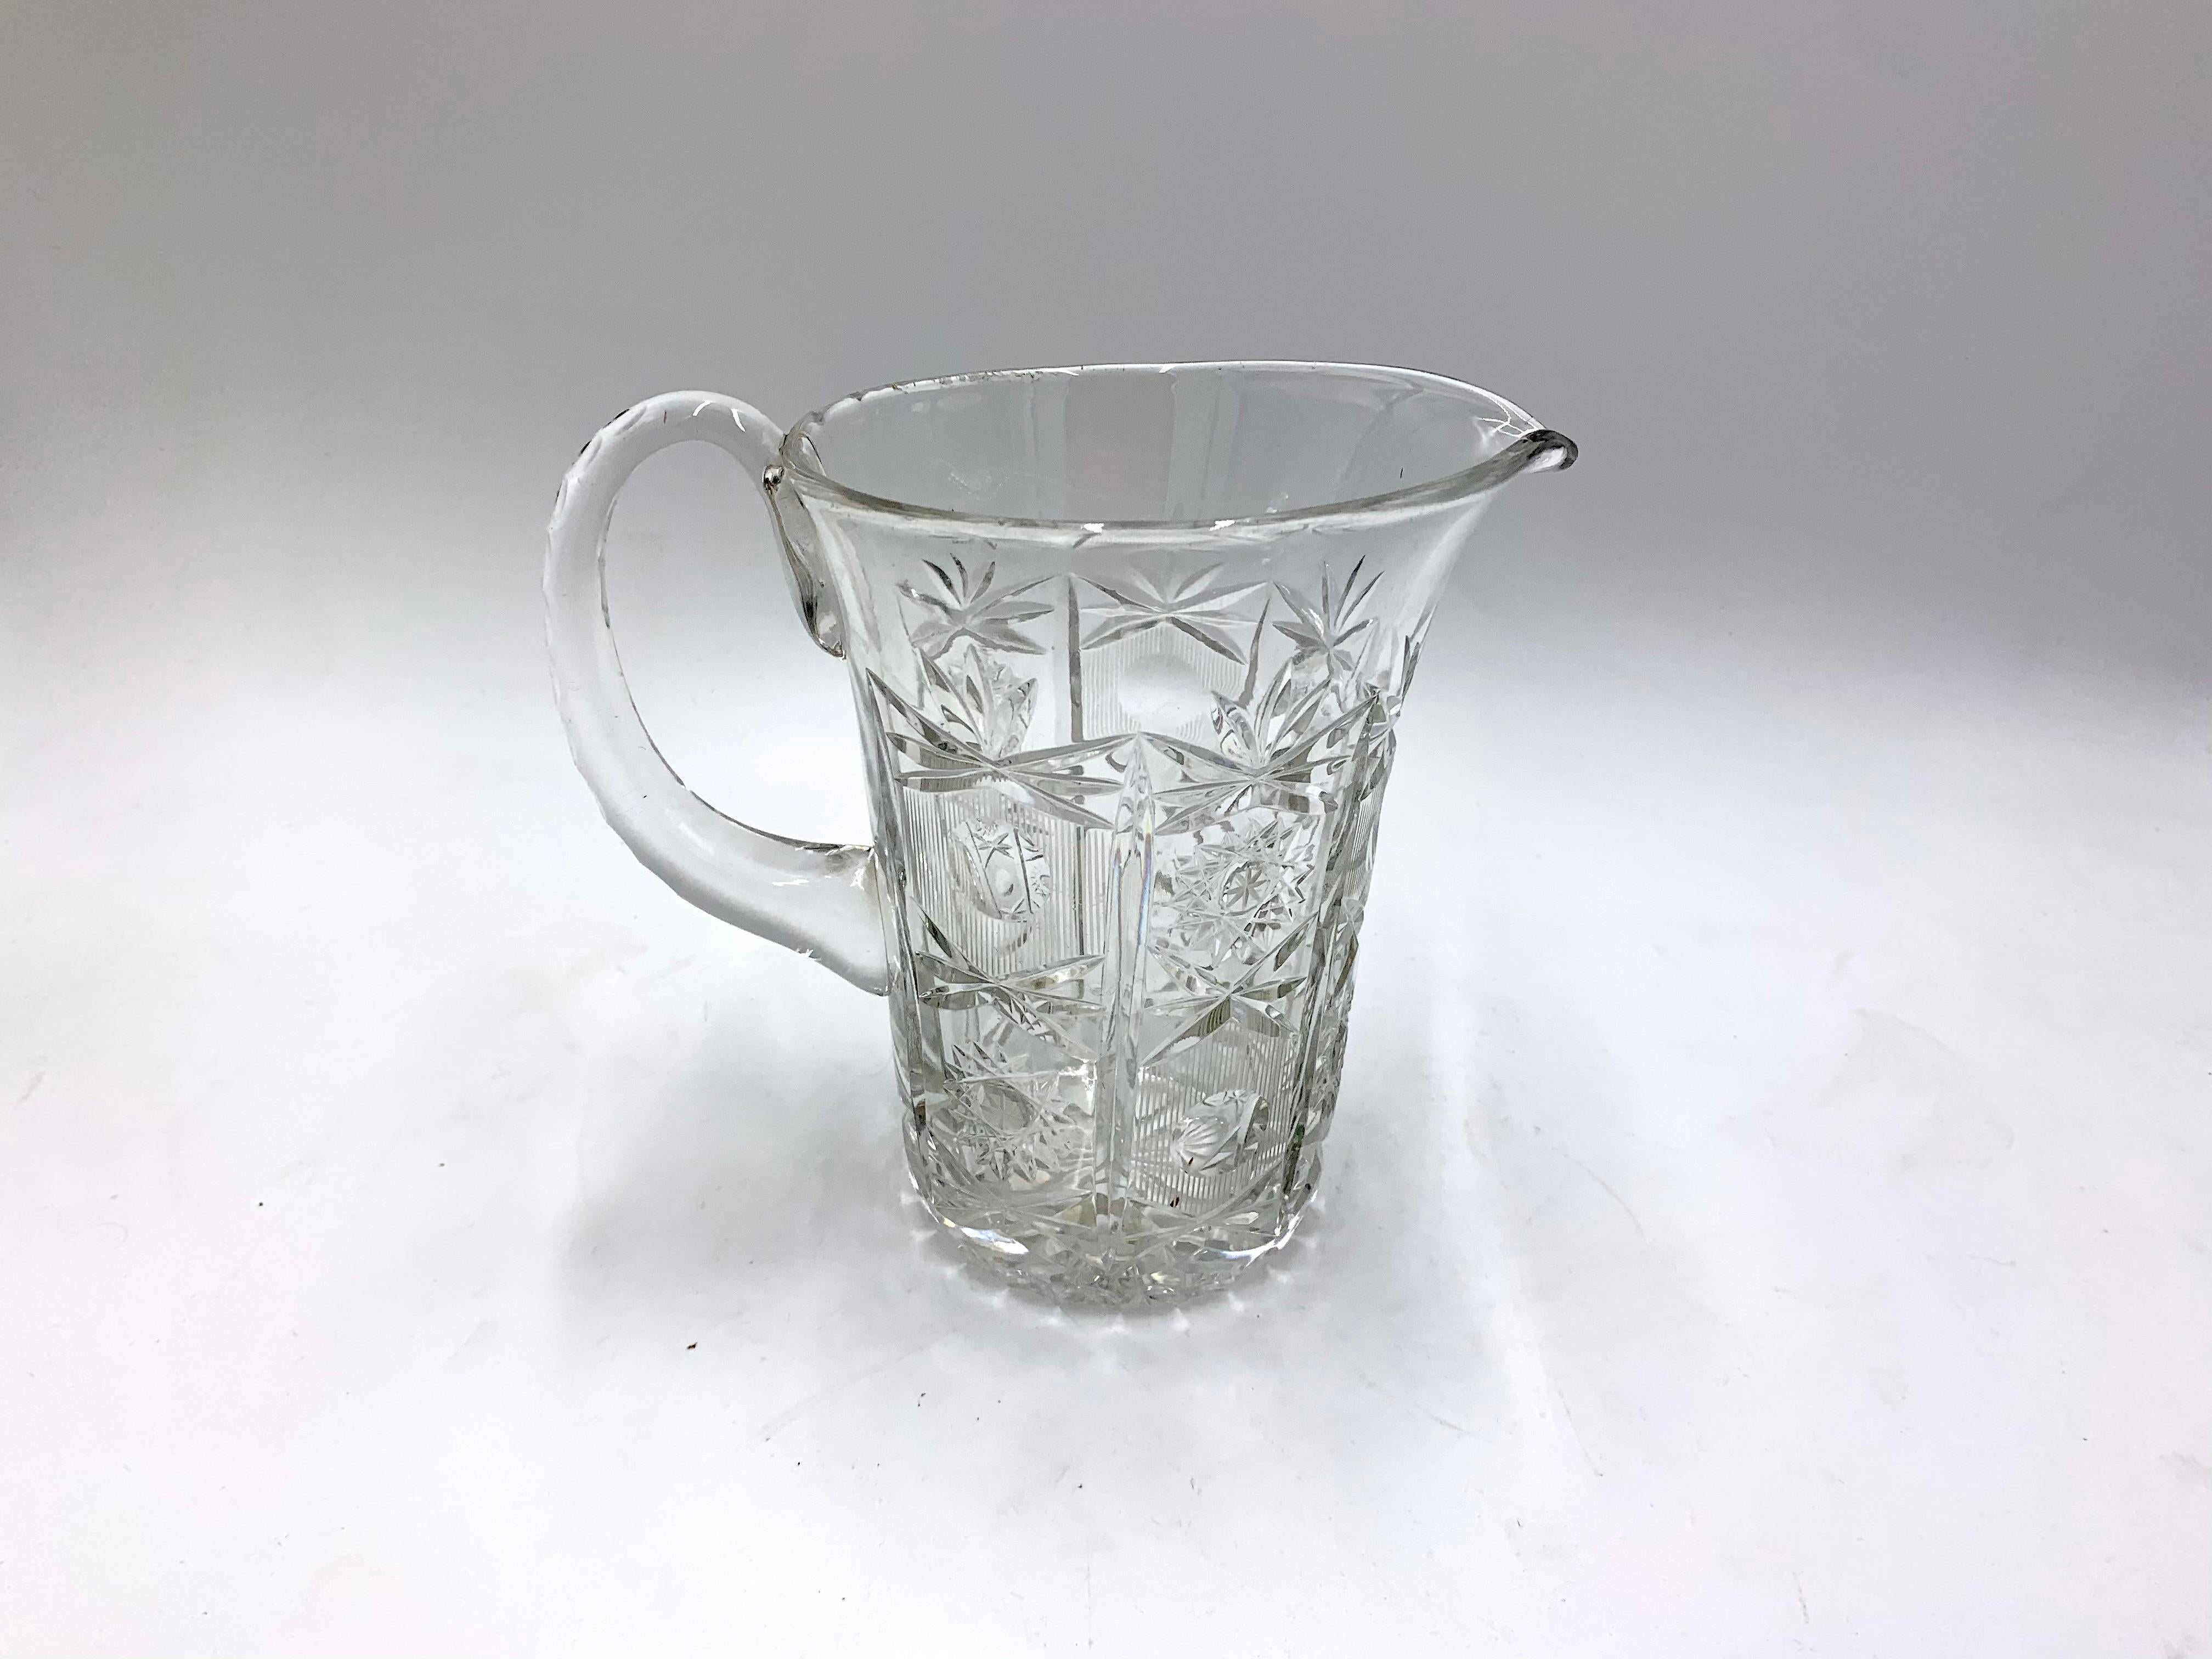 Clear jug.
Produced in Poland in 1950-1970s..
very good condition.
Dimensions: height: 17 cm / diameter 14 cm.